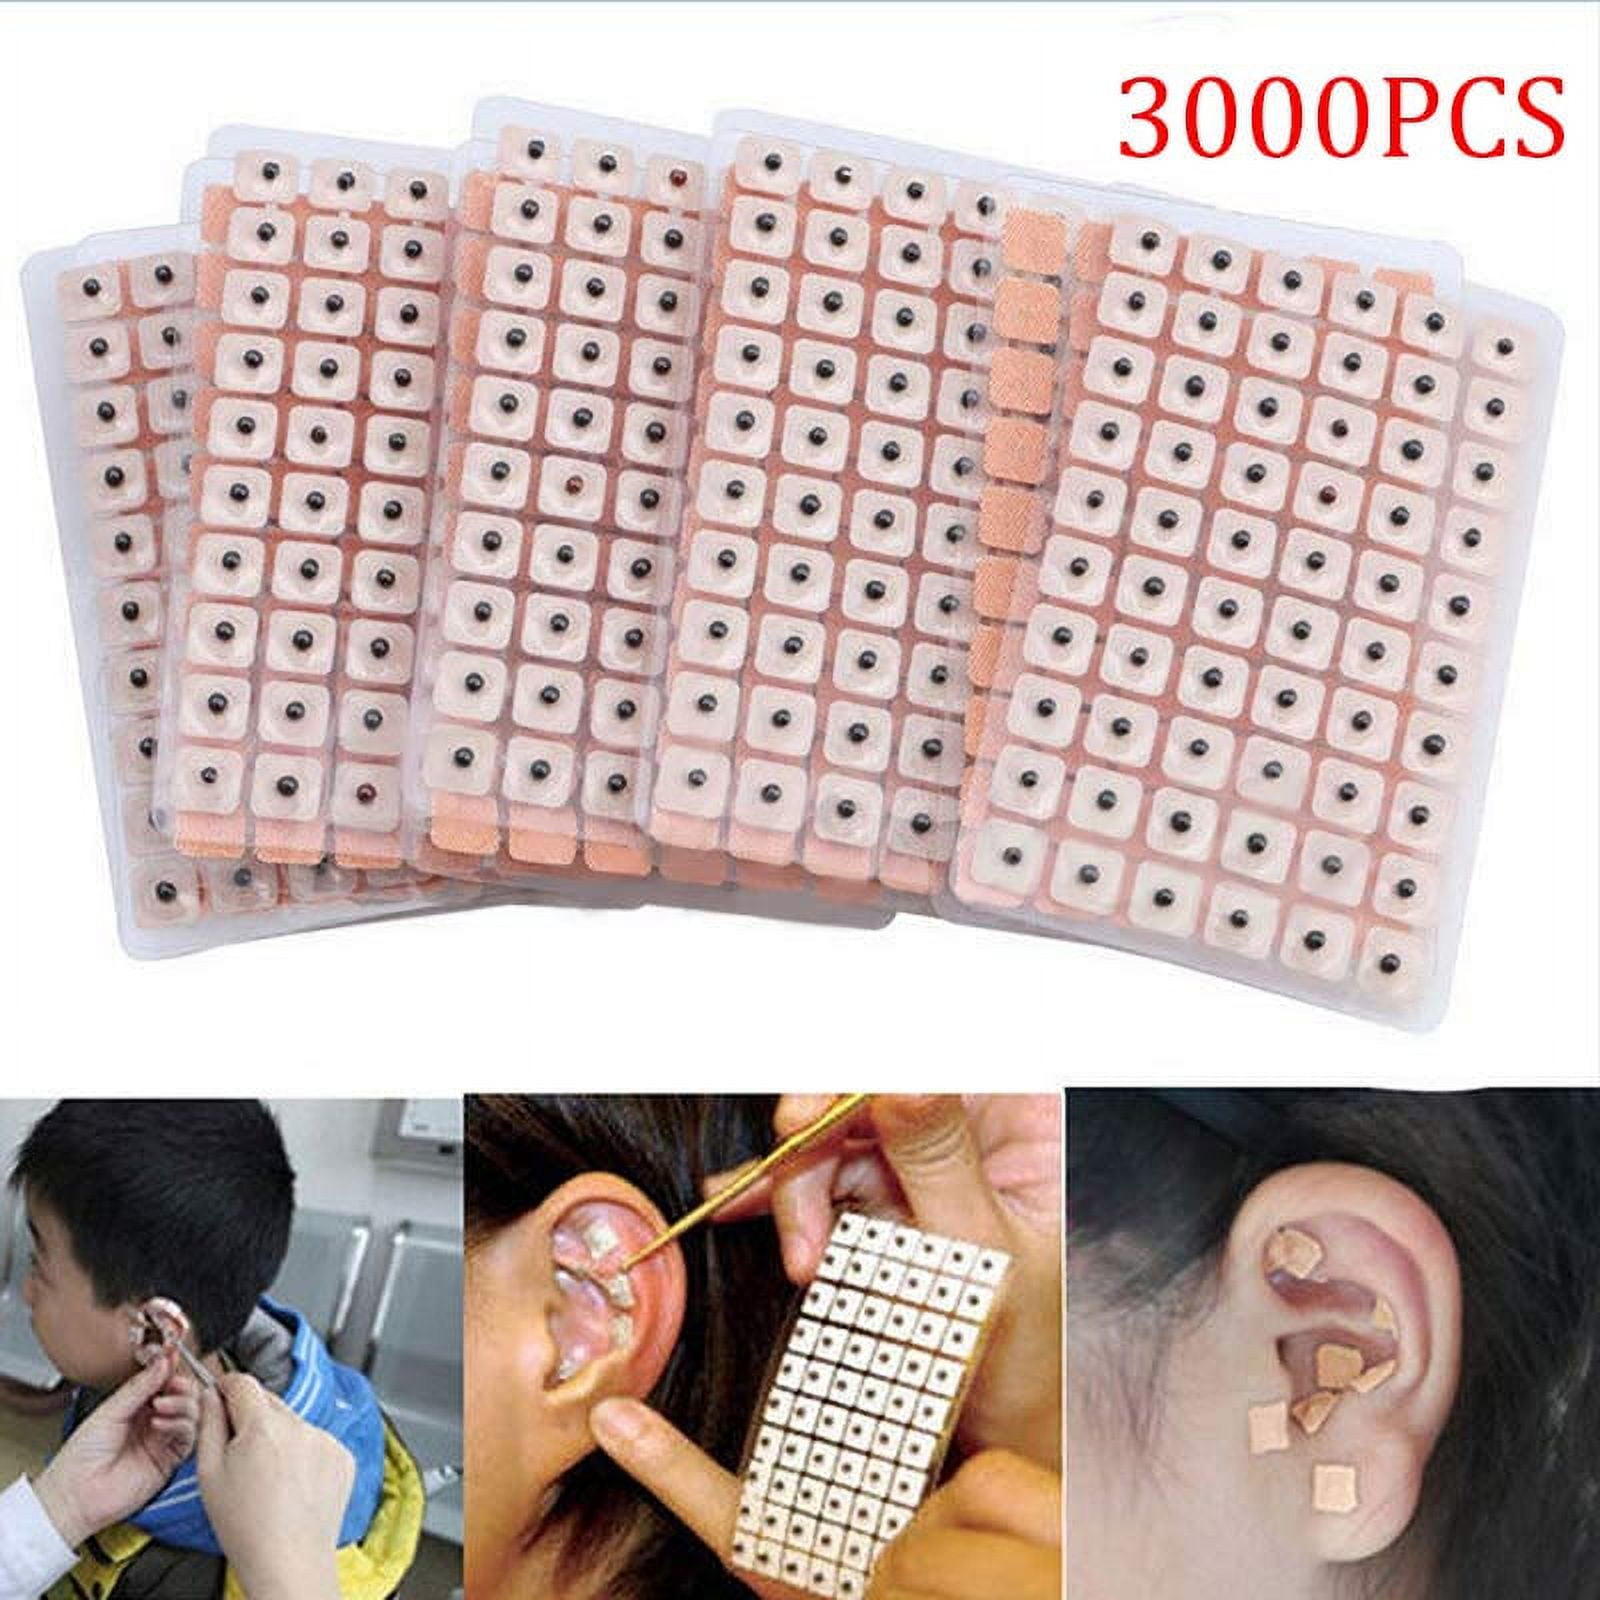 3000pcs Acupuncture Needle Ear Seeds Massage Paste Ears Stickers